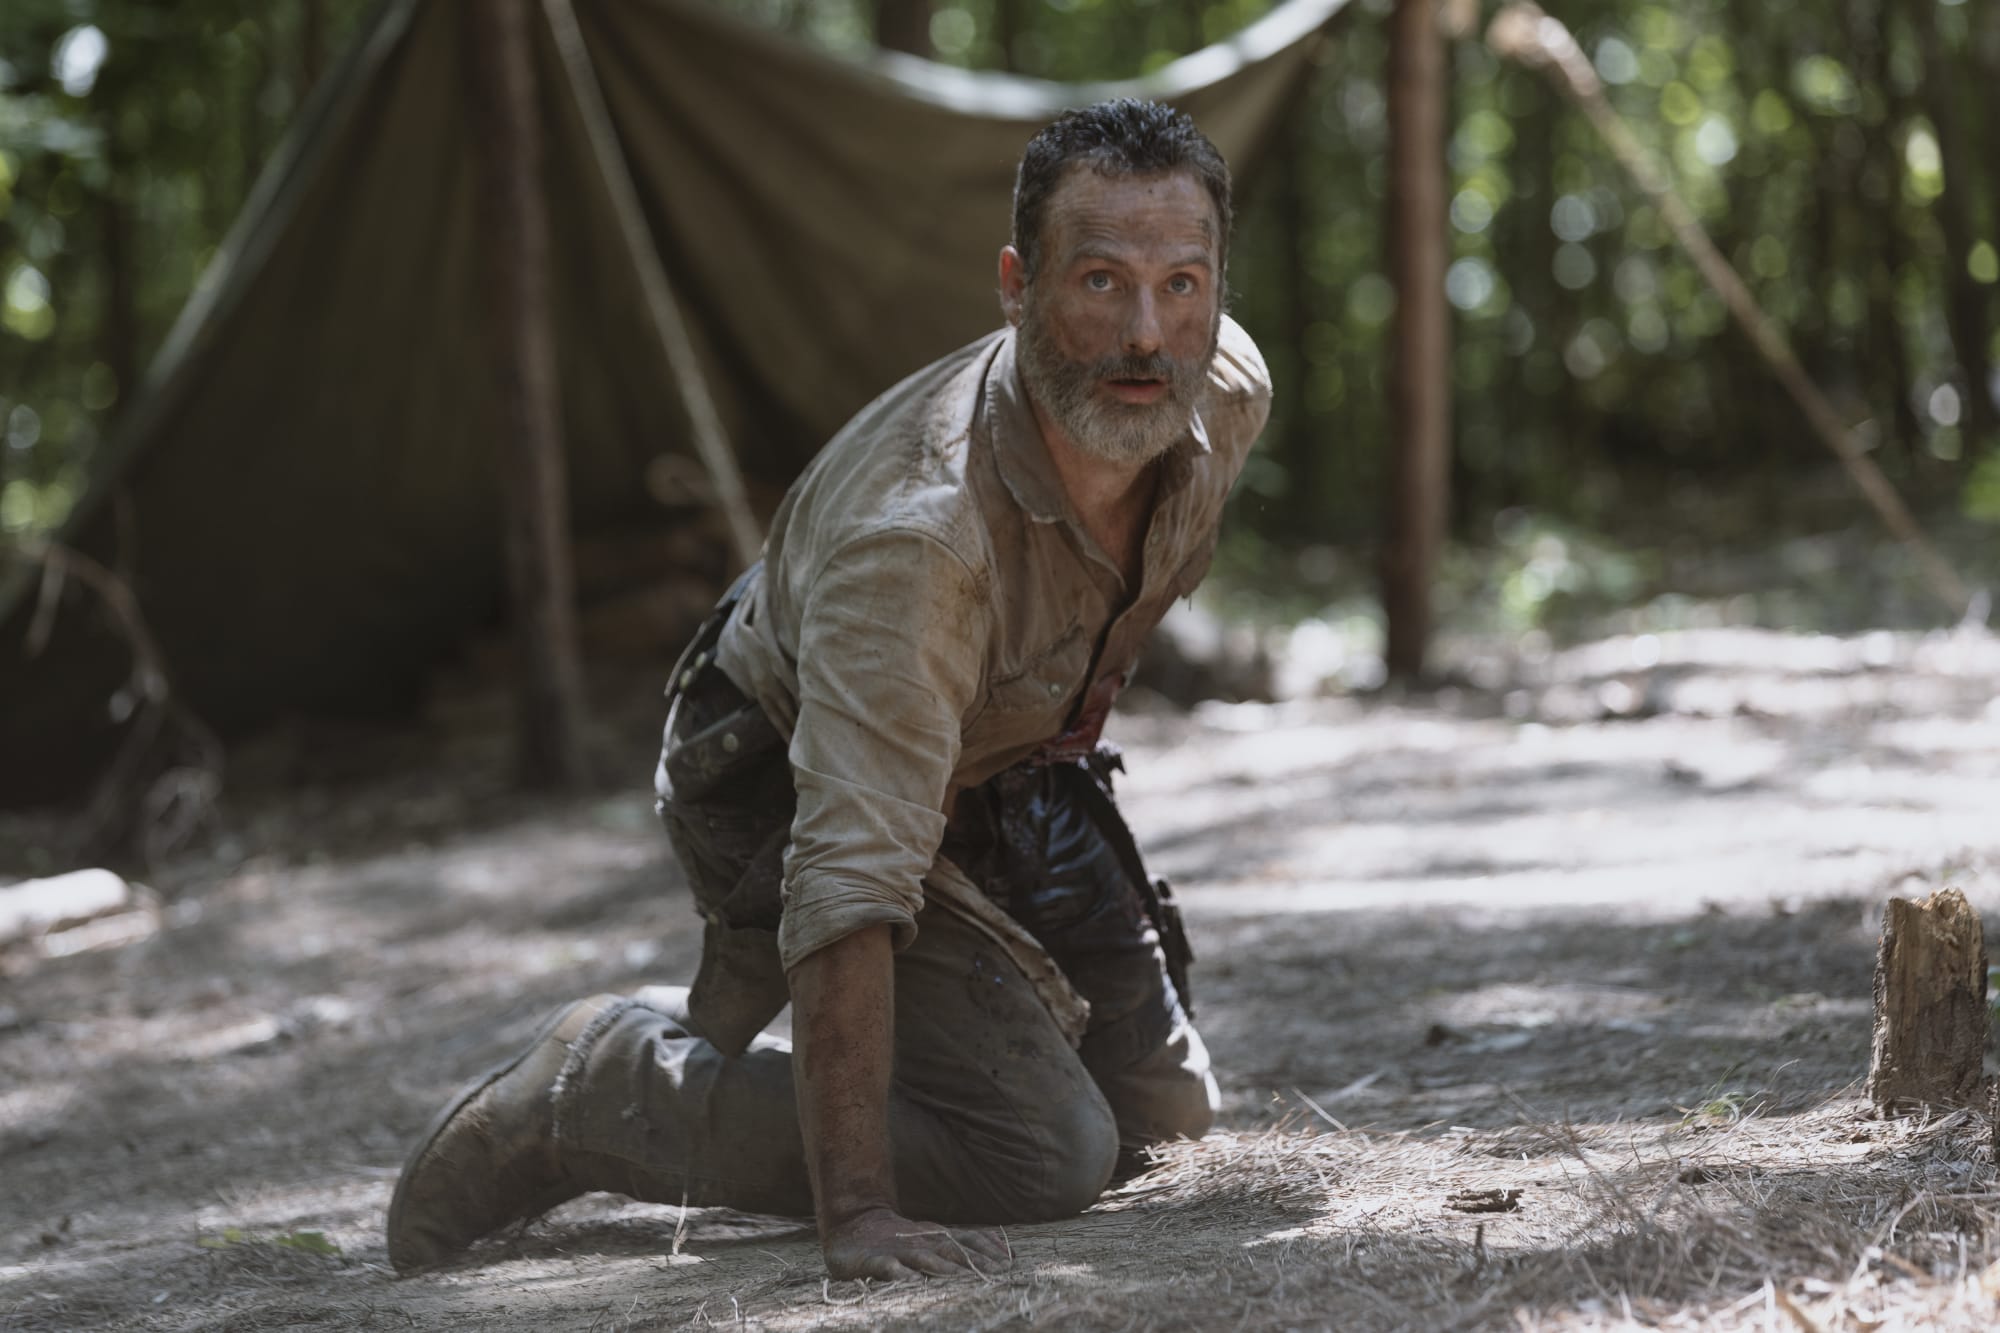 No, we won’t see Young Rick Grimes in Tales of The Walking Dead